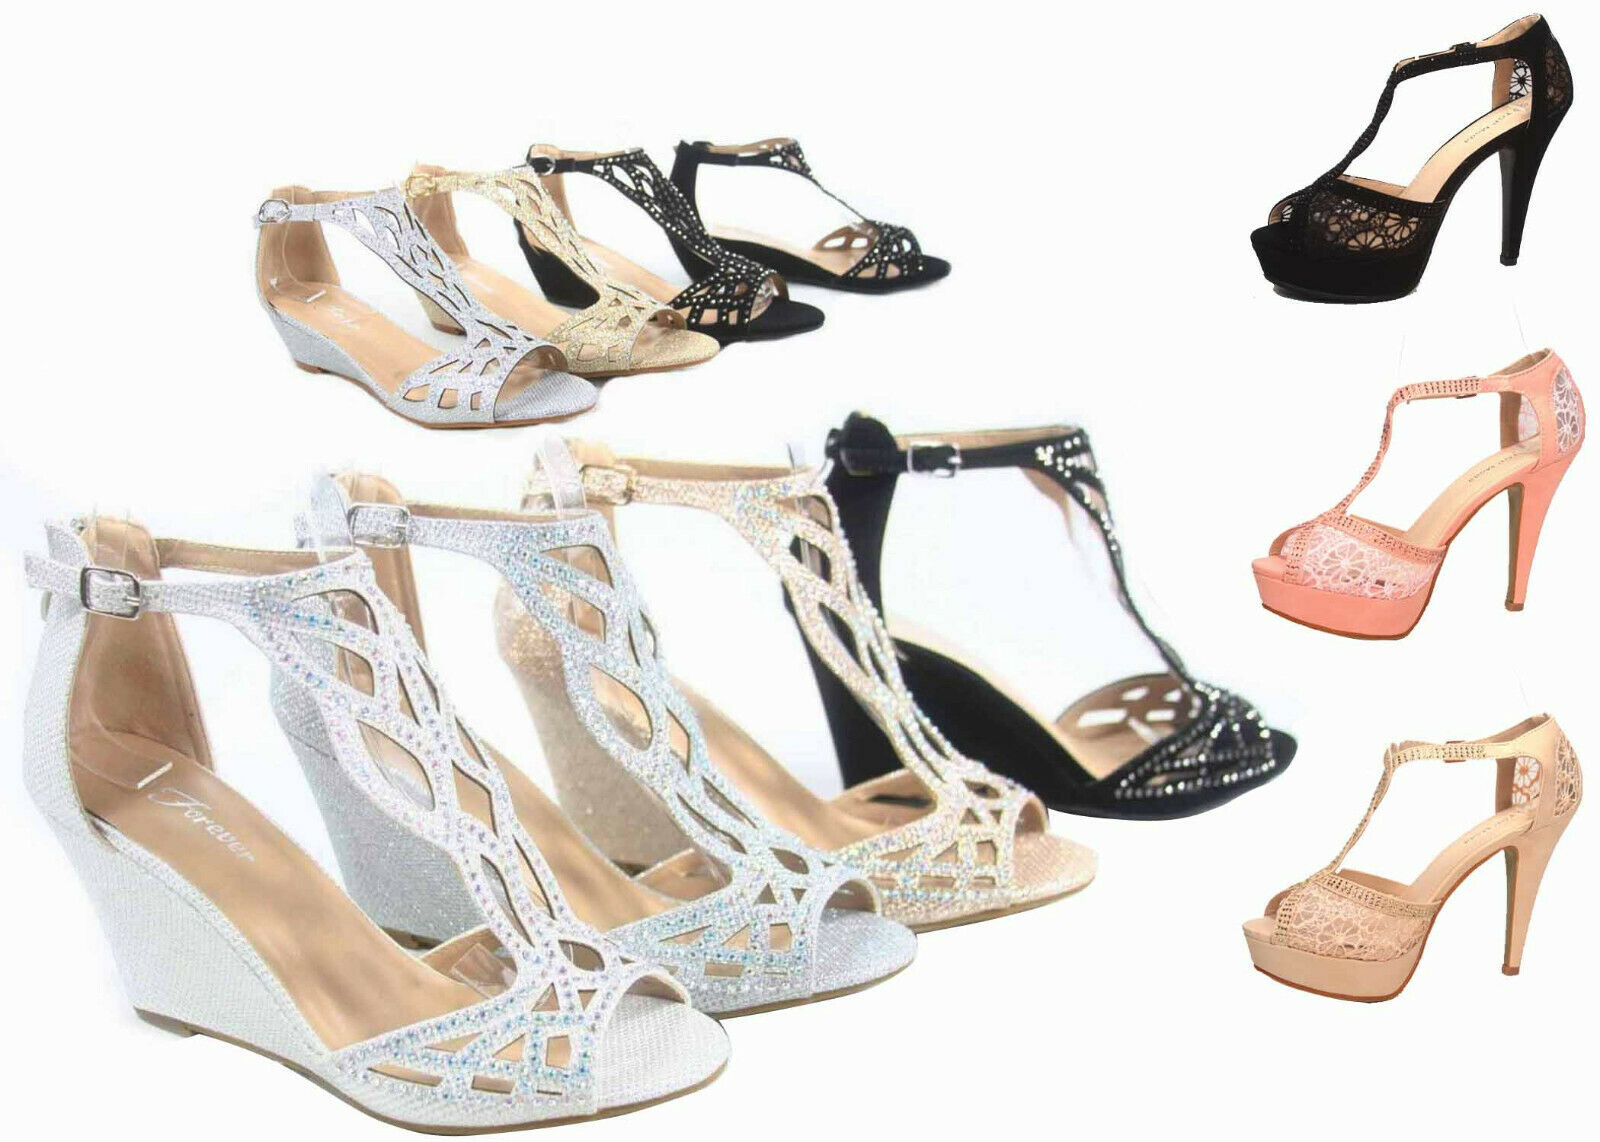 New Women's Sexy Bridal Open Toe Glitter Rhinestone Wedge Party Shoes Size 5 -10